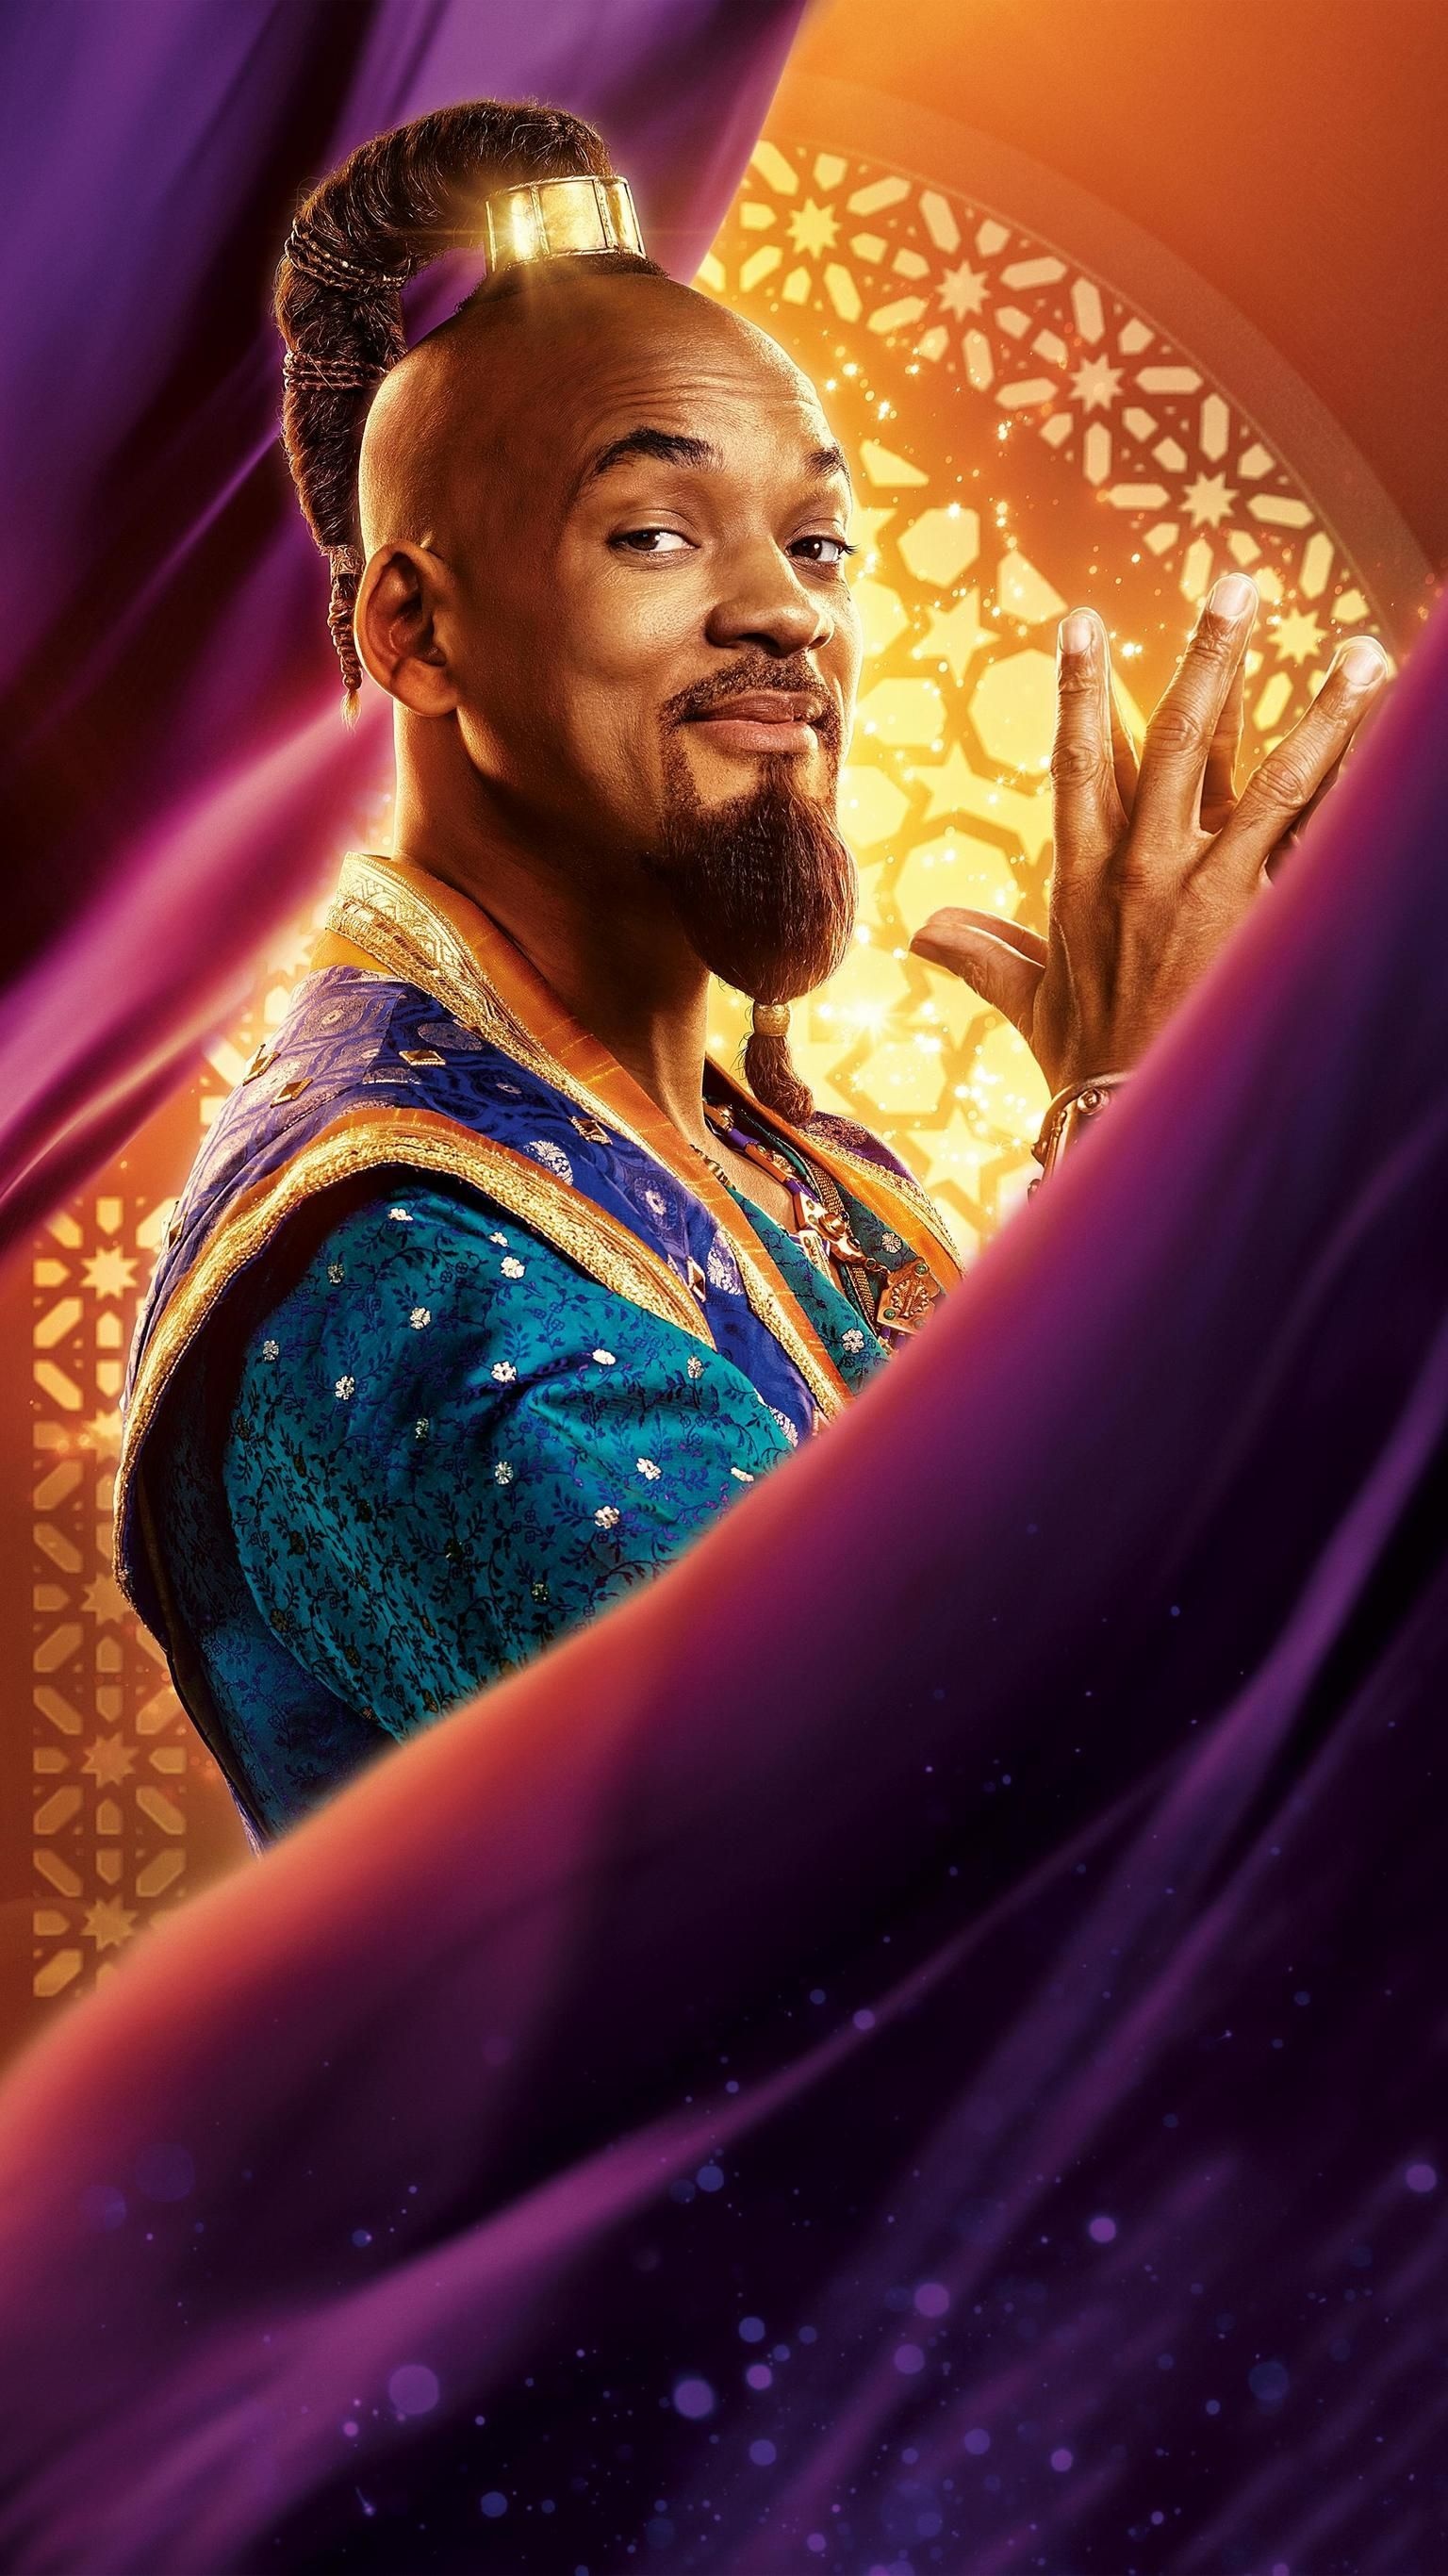 Will Smith: Genie, Aladdin, 2019 American musical fantasy film directed by Guy Ritchie. 1540x2740 HD Wallpaper.